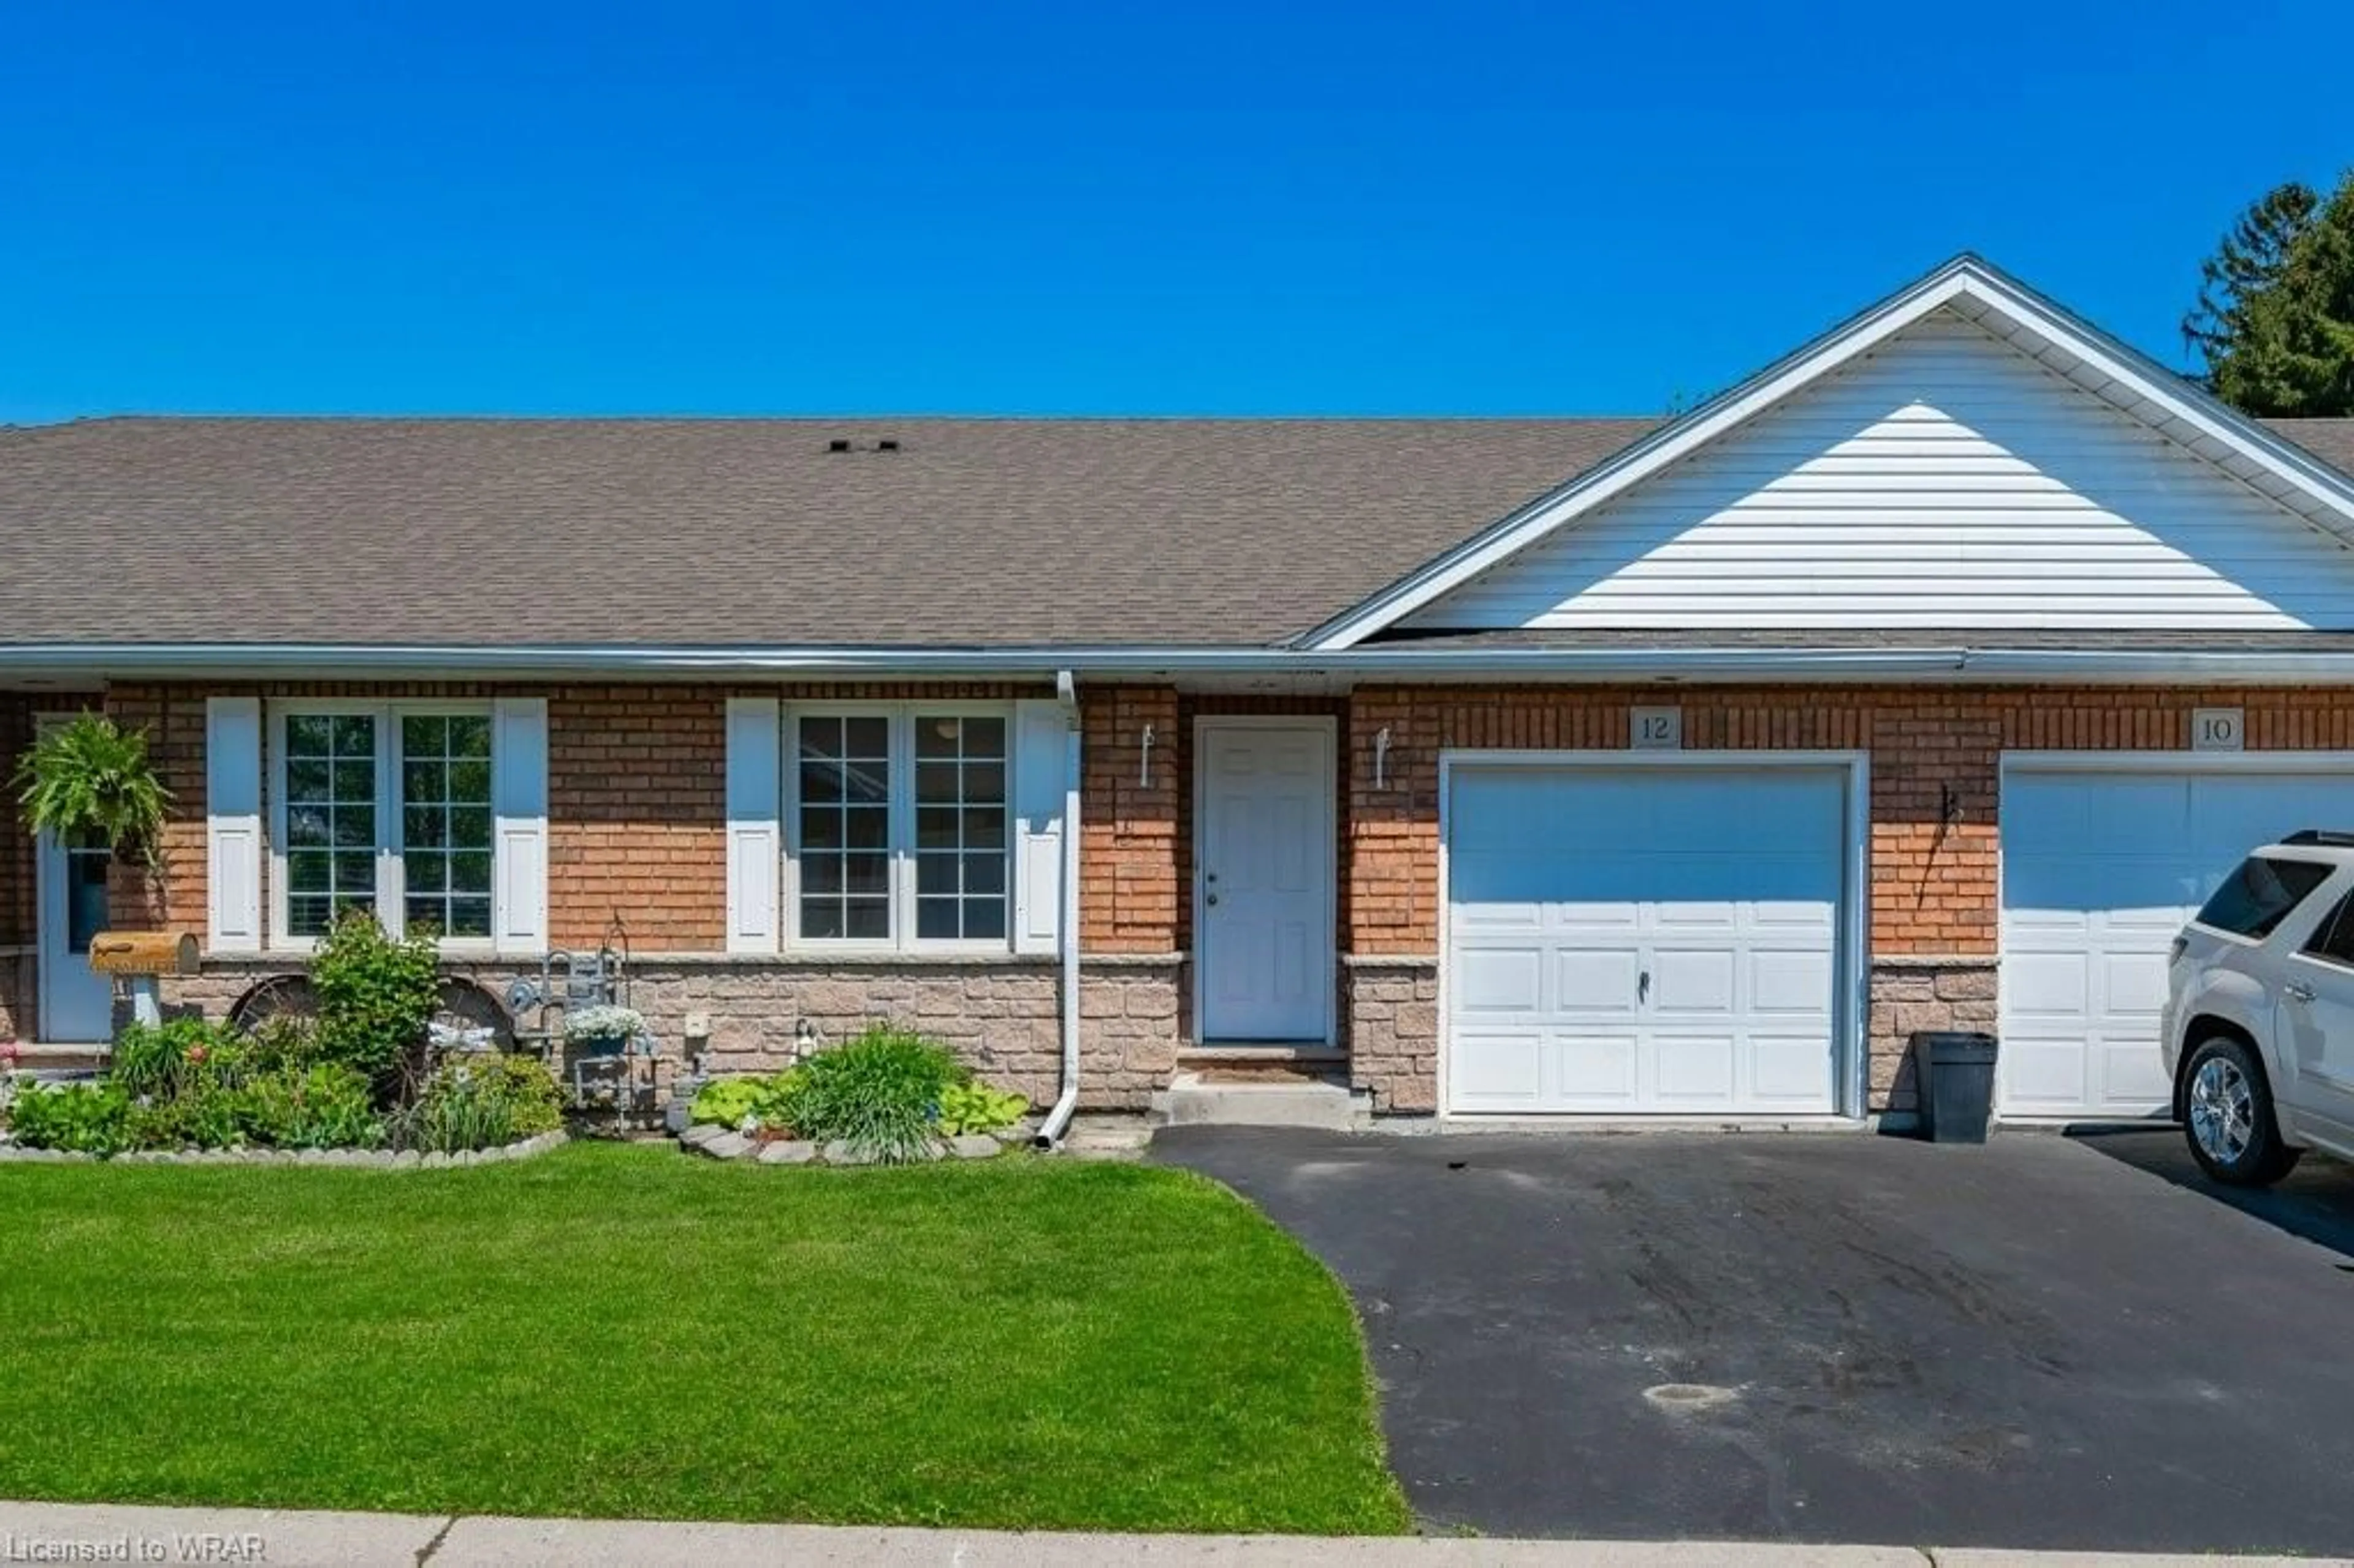 Home with brick exterior material for 12 Clonmel Lane, Port Dover Ontario N0A 1N1